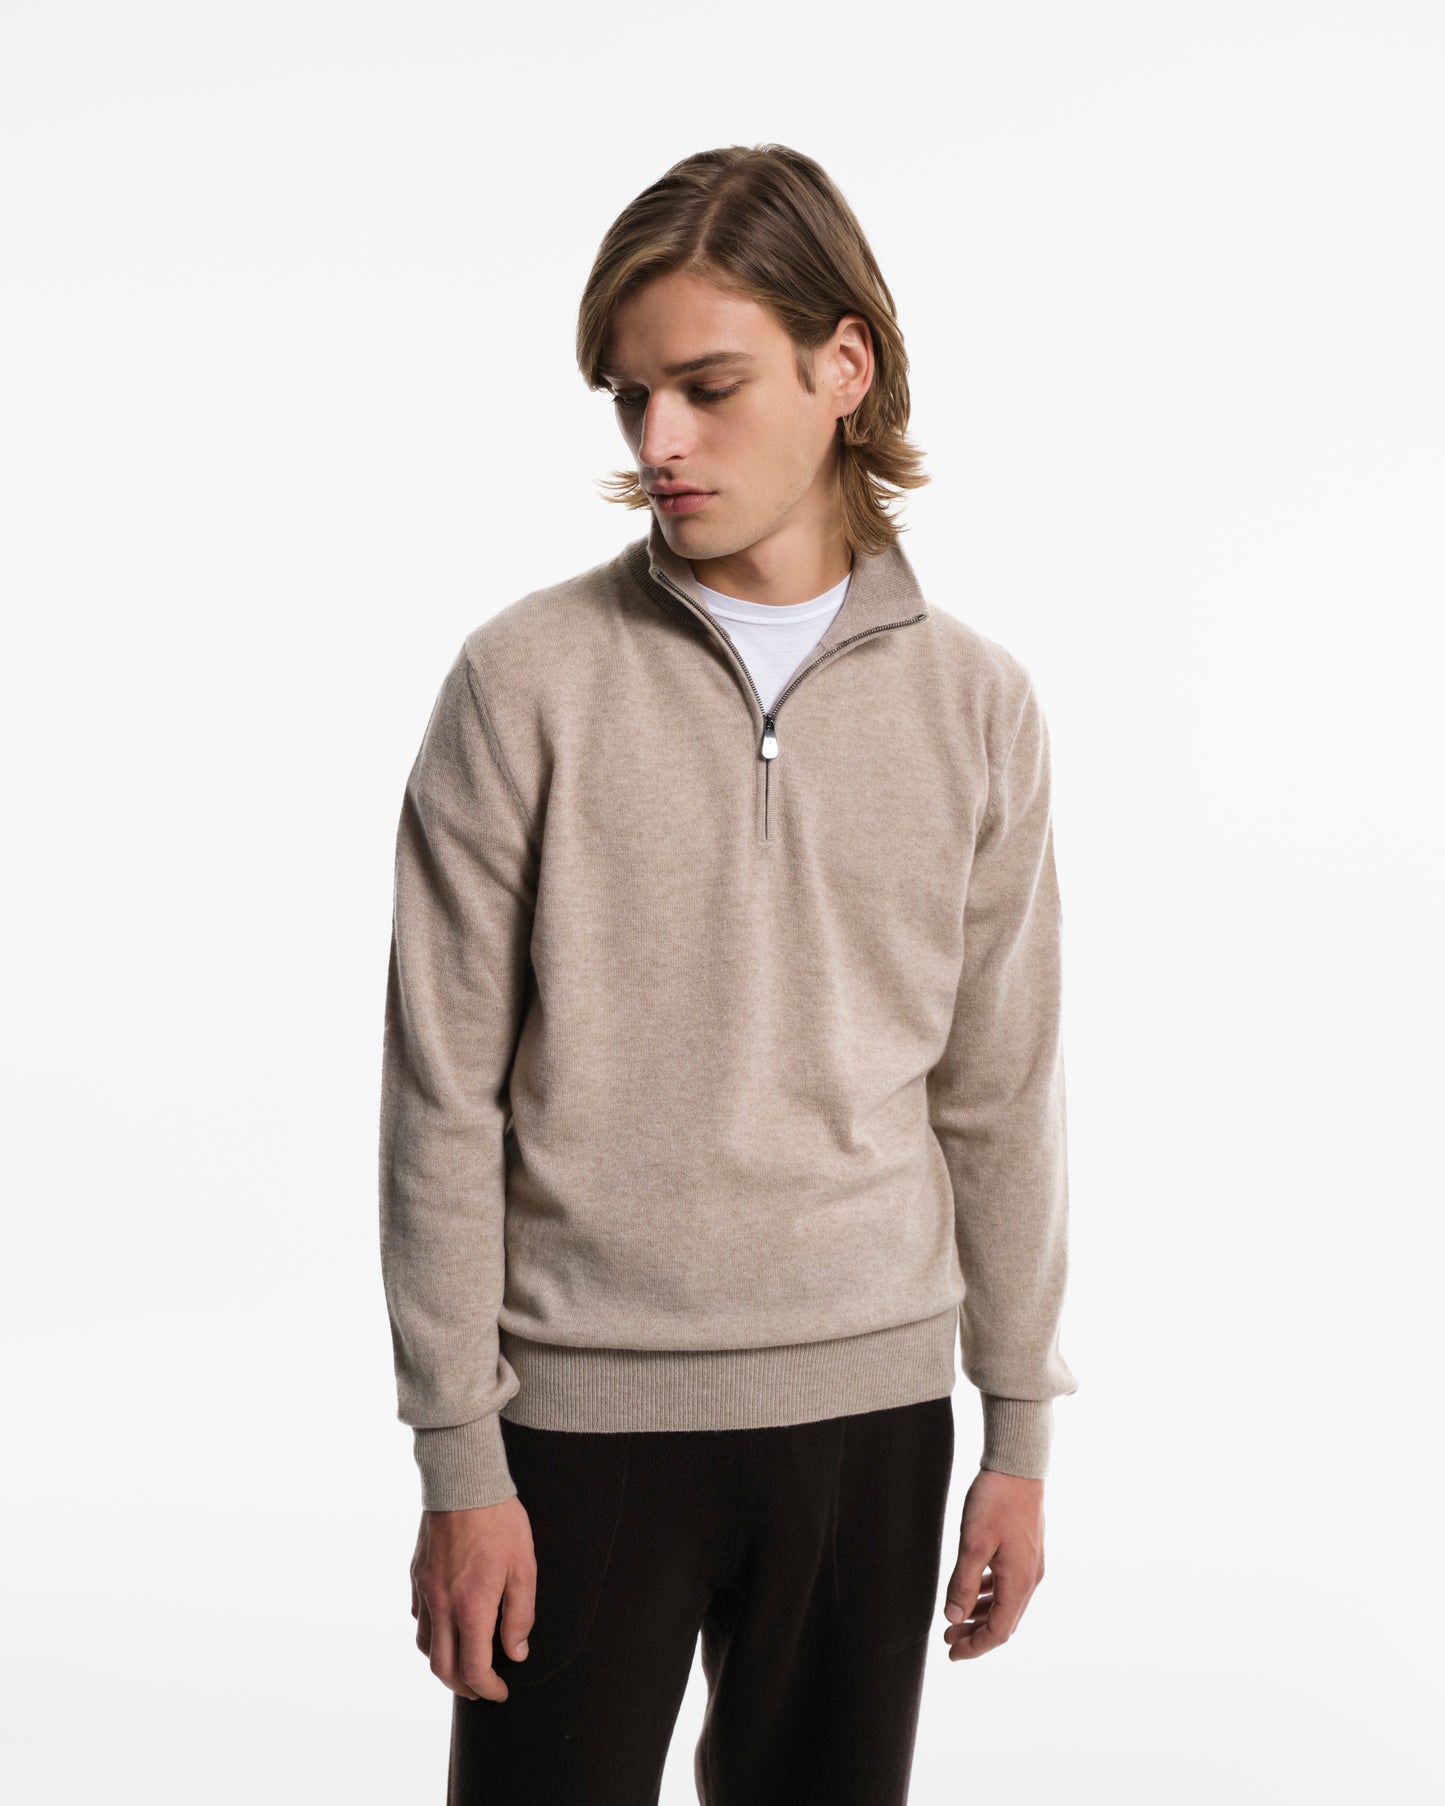 Zip turtleneck in pure natural Cashmere